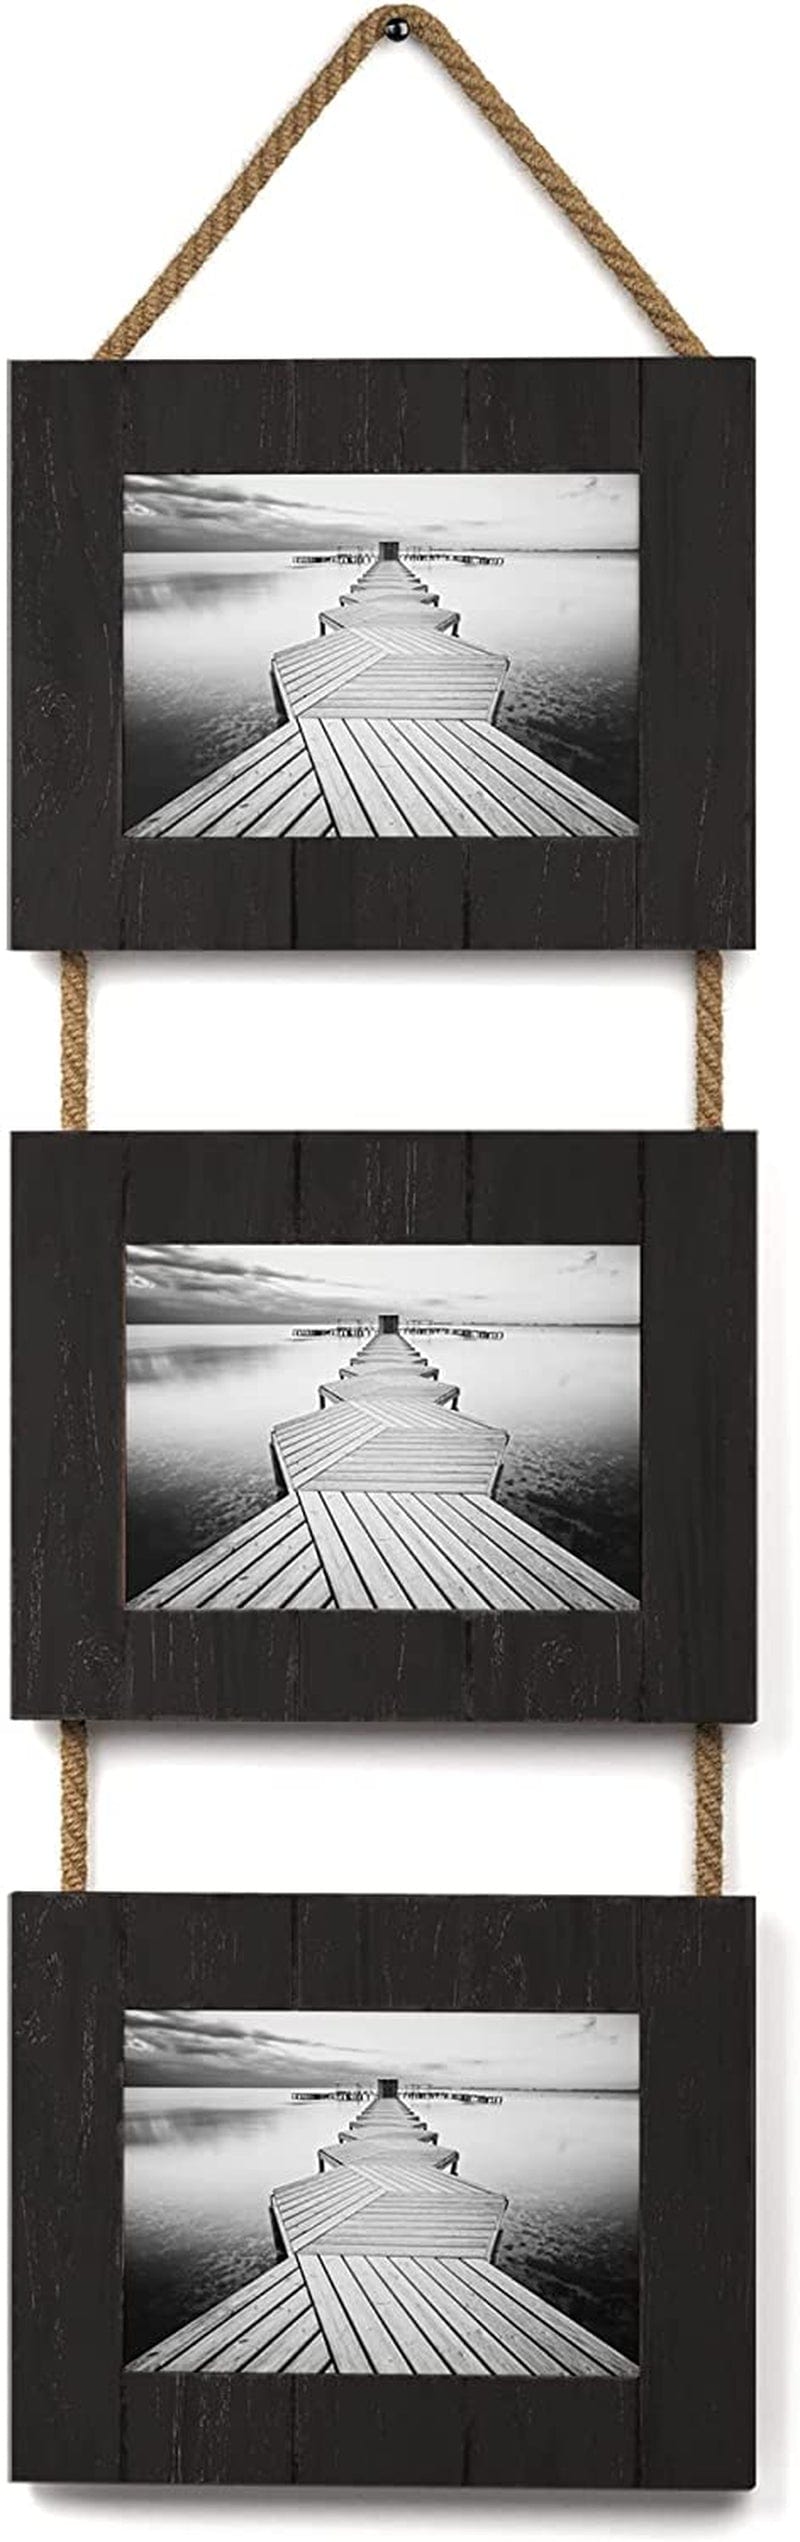 Barnyard Designs 5X7 Rustic Picture Frame 5X7, Wood Picture Frames, Farmhouse Picture Frames, Distressed Wood Frame, Rustic Frames, Horizontal Display, Wall Hanging Farmhouse Frames, White, Set of 3 Home & Garden > Decor > Picture Frames Barnyard Designs Black  